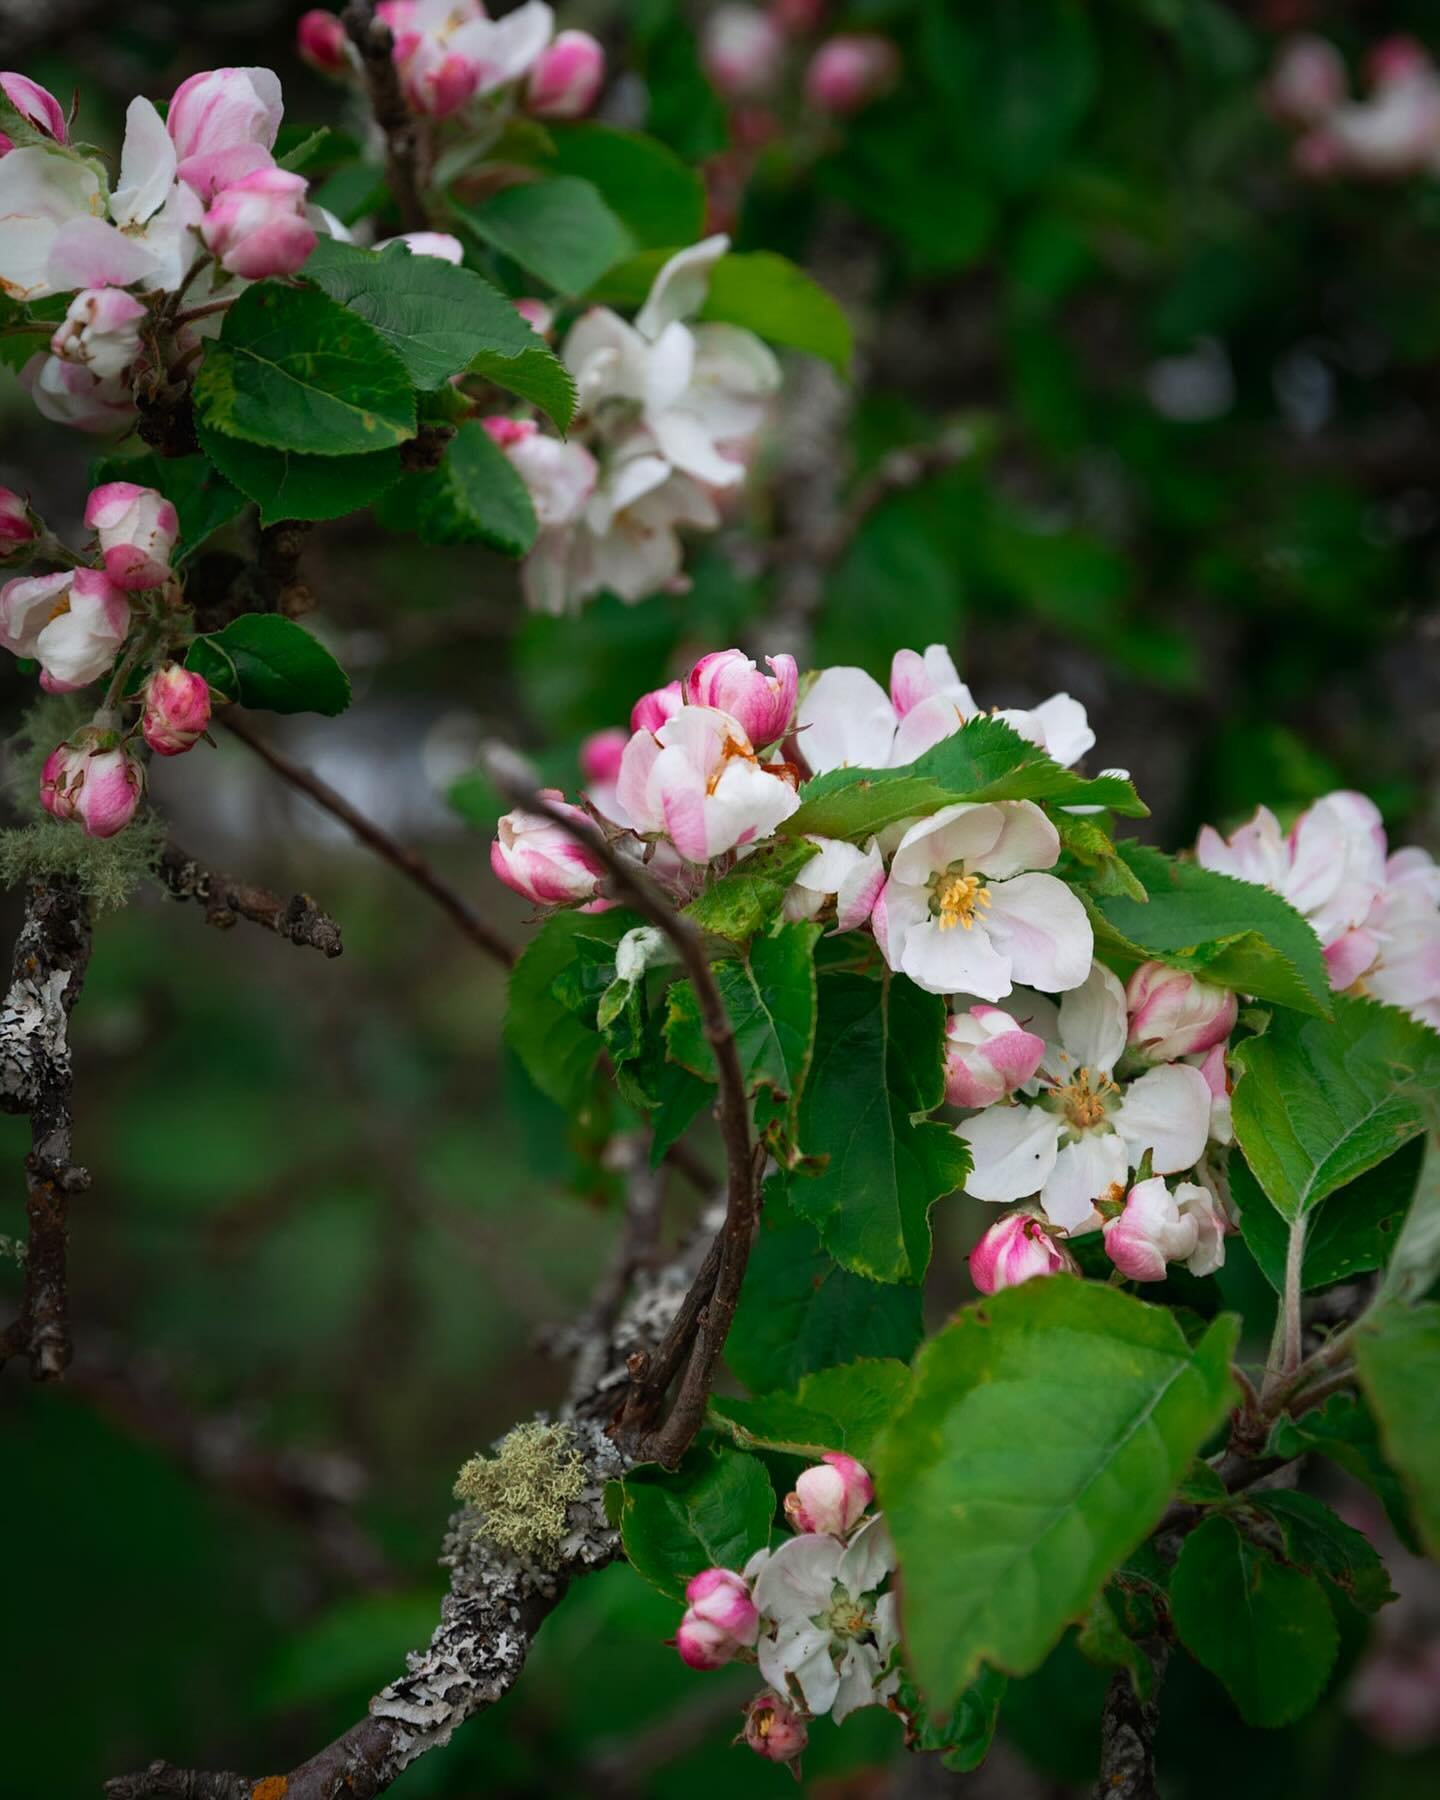 It&rsquo;s been *insanely* gorgeous here recently and the apple blossoms in my neighbor&rsquo;s tree are in full bloom. 🌸 They&rsquo;re so shy and pretty, I couldn&rsquo;t help myself from snapping a few pics!

This tree reminds me of the book &ldqu